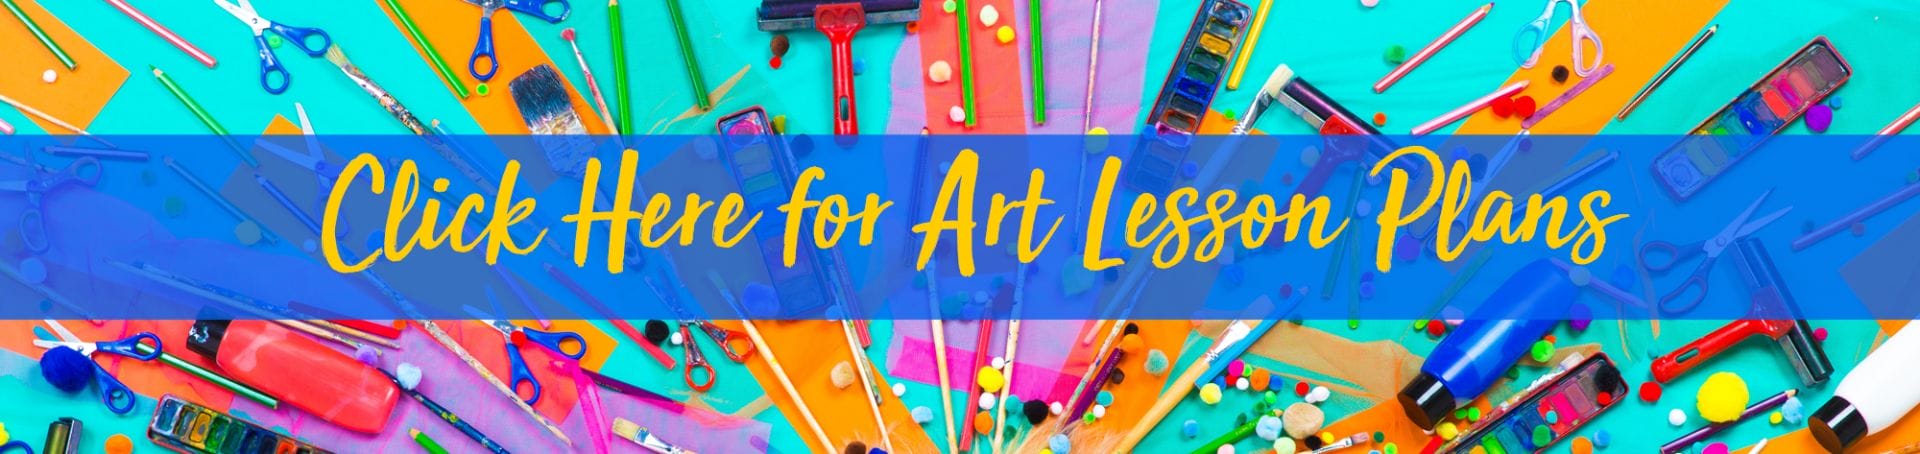 Click here for art lesson plans